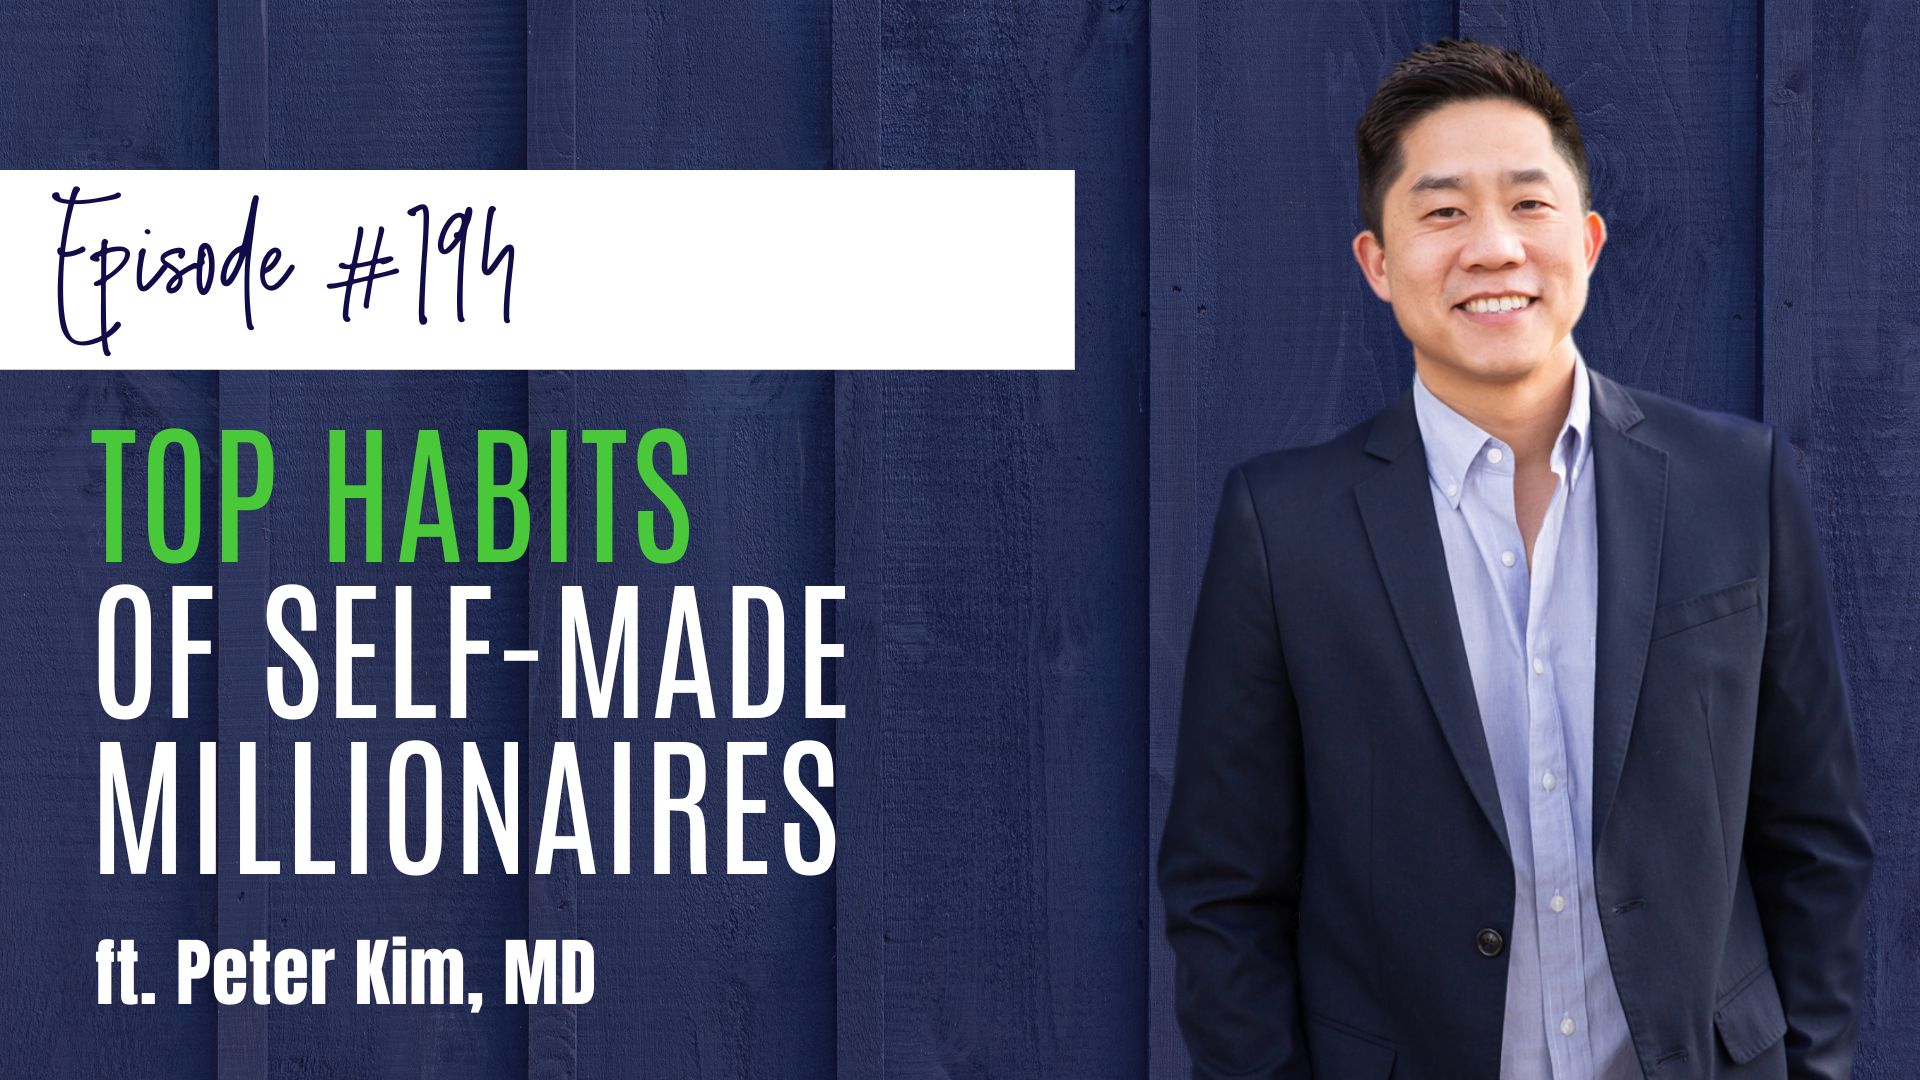 #194 Top Habits of Self-Made Millionaires, ft. Dr. Peter Kim MD